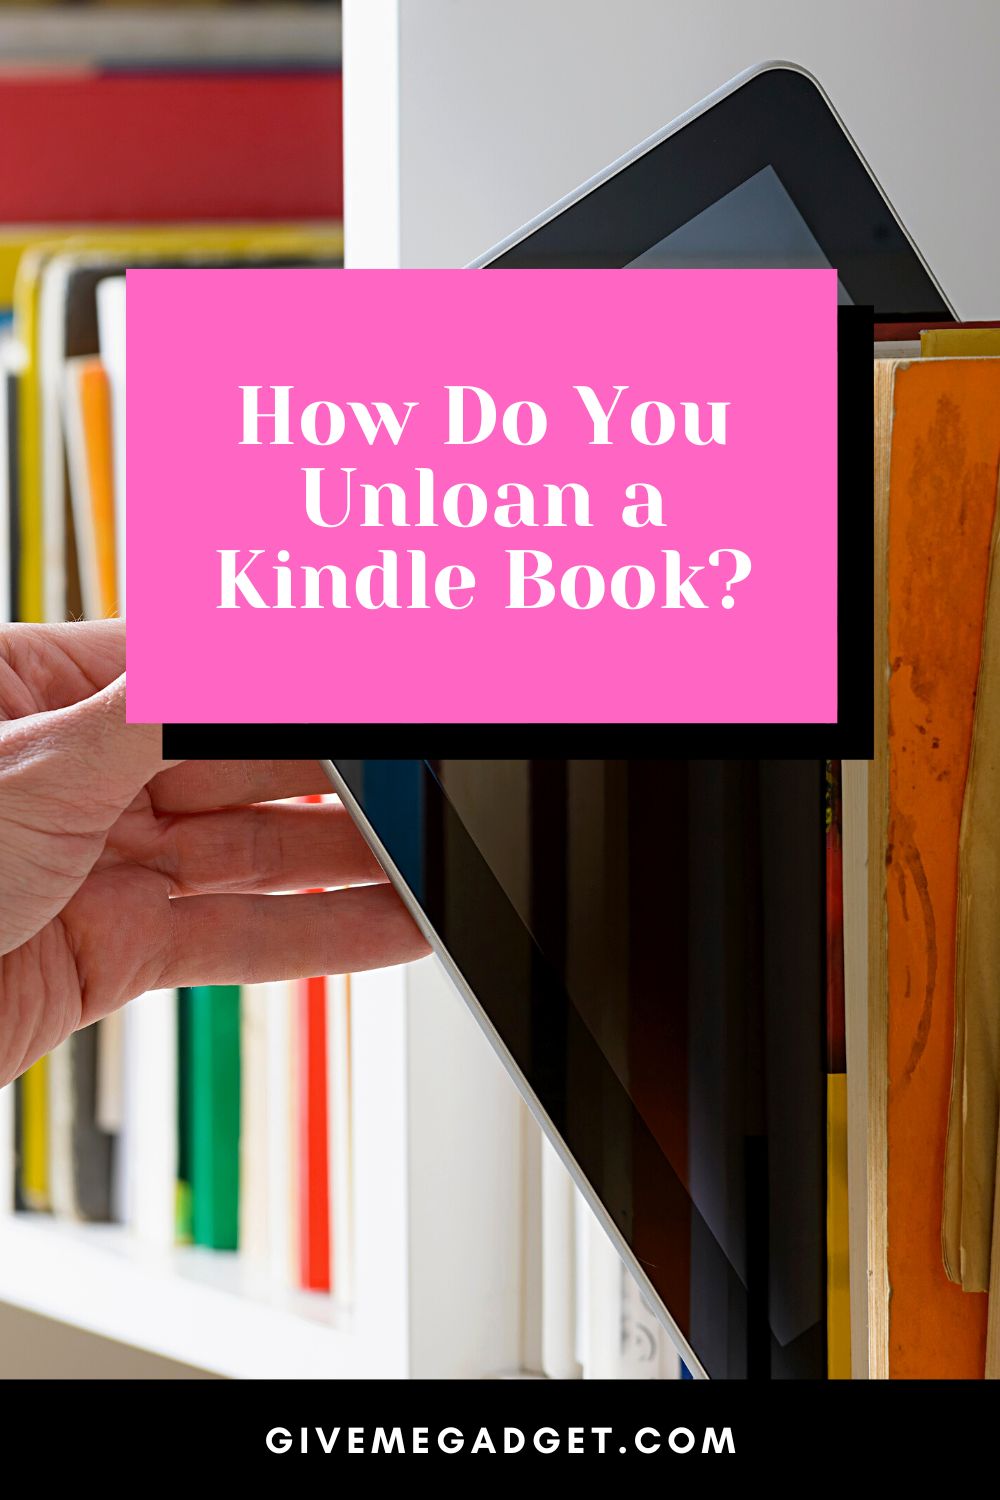 How Do You Unloan a Kindle Book?